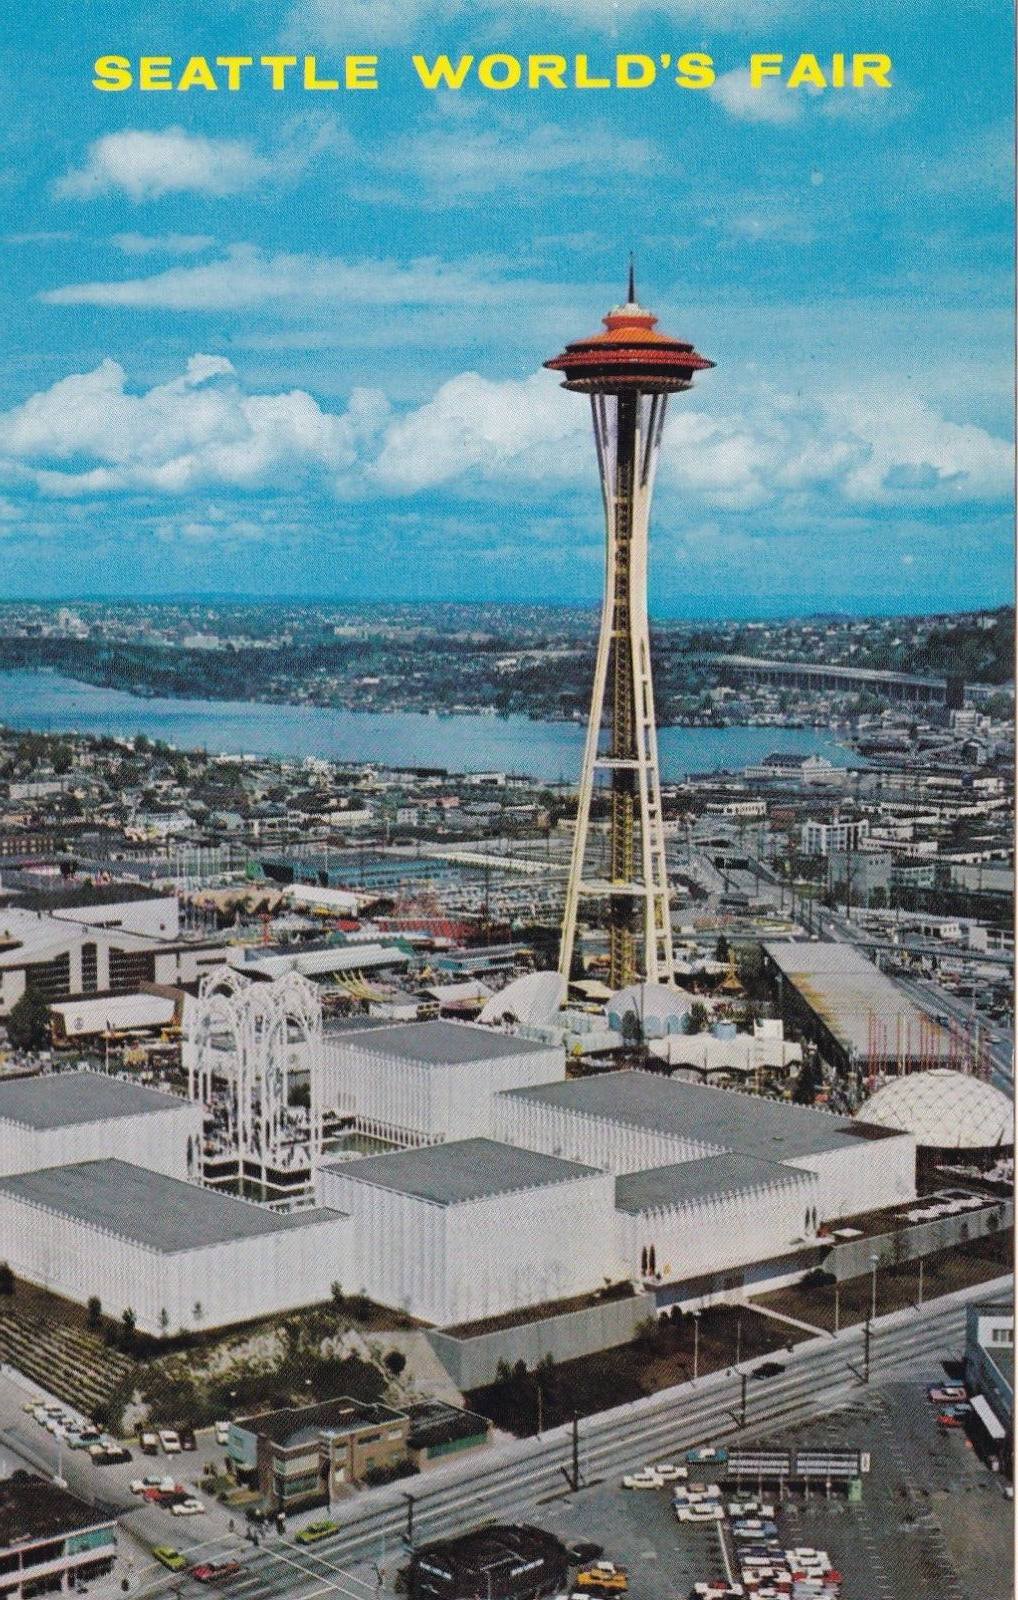 <p><span><span><span><span><span><span>The Space Needle was designed by architect John Graham and built for the 1962 Seattle World's Fair, also known as the Century 21 Exposition. This futuristic tower was designed to represent innovation and progress, reflecting the Space Age optimism at the time.</span></span></span></span></span></span></p>  <p><span><span><span><span><span><span>At 605 feet, the Space Needle quickly became the centerpiece of the Seattle World's Fair, offering visitors breathtaking views of the city and the surrounding Puget Sound region from its observation deck. Its unique saucer-shaped design was inspired by the idea of a flying saucer.</span></span></span></span></span></span></p>  <p><span><span><span><span><span><span>After the fair, the Space Needle continued to attract visitors from around the world. Today, the building welcomes over a million visitors annually. You can ride its elevators to the observation deck to enjoy panoramic vistas of the city, dine in the revolving restaurant, and experience the glass-floored observation deck.</span></span></span></span></span></span></p>